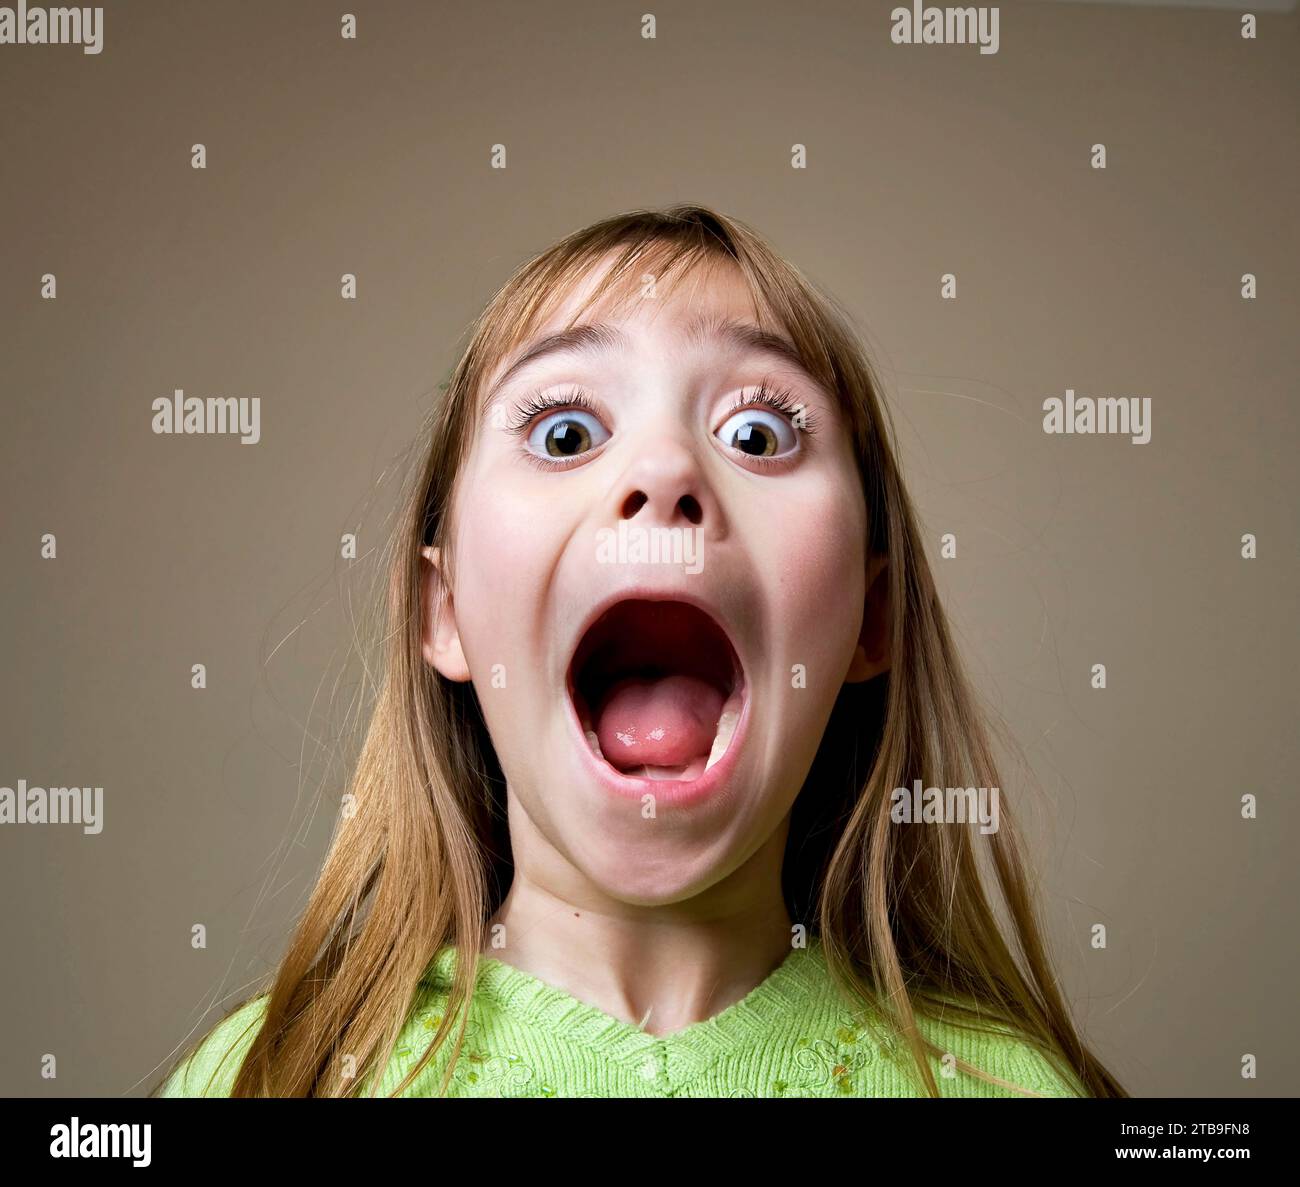 Young girl opening her mouth wide and shows the camera an excited expression; Studio Stock Photo